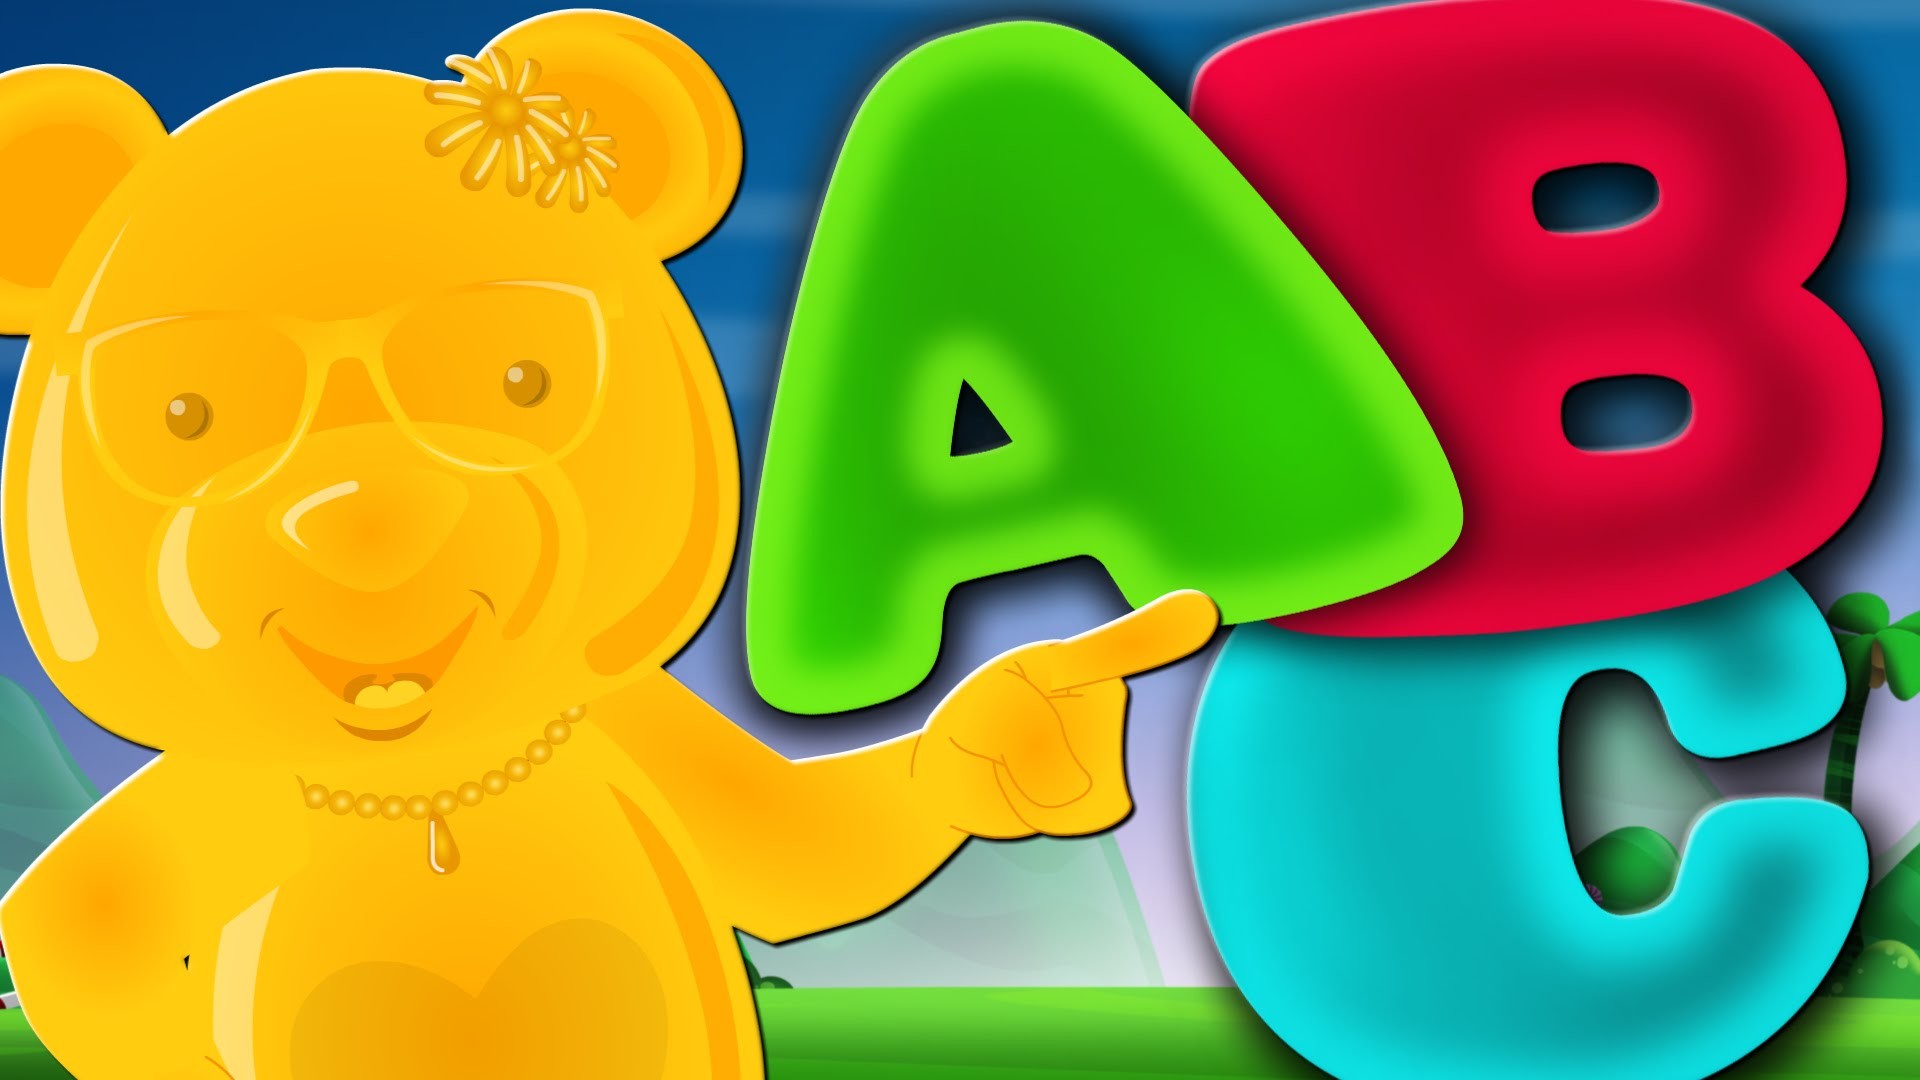 1920x1080 ABC Song | Alphabets Songs | YouTube Nursery Rhymes from Jelly Bears -  YouTube